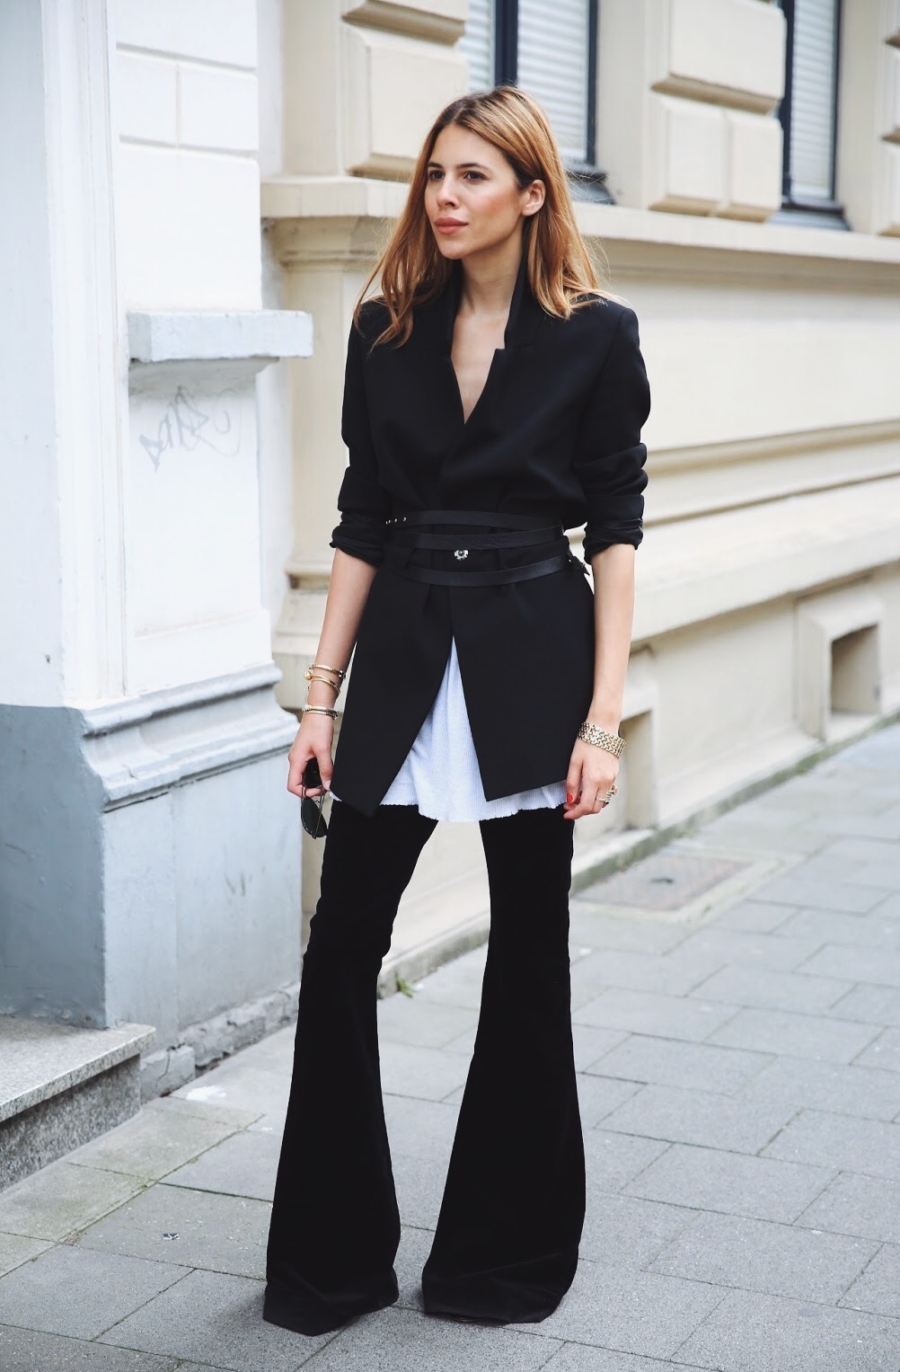 7 Pieces to Spice Up Your Work Outfit - Jessica Wang